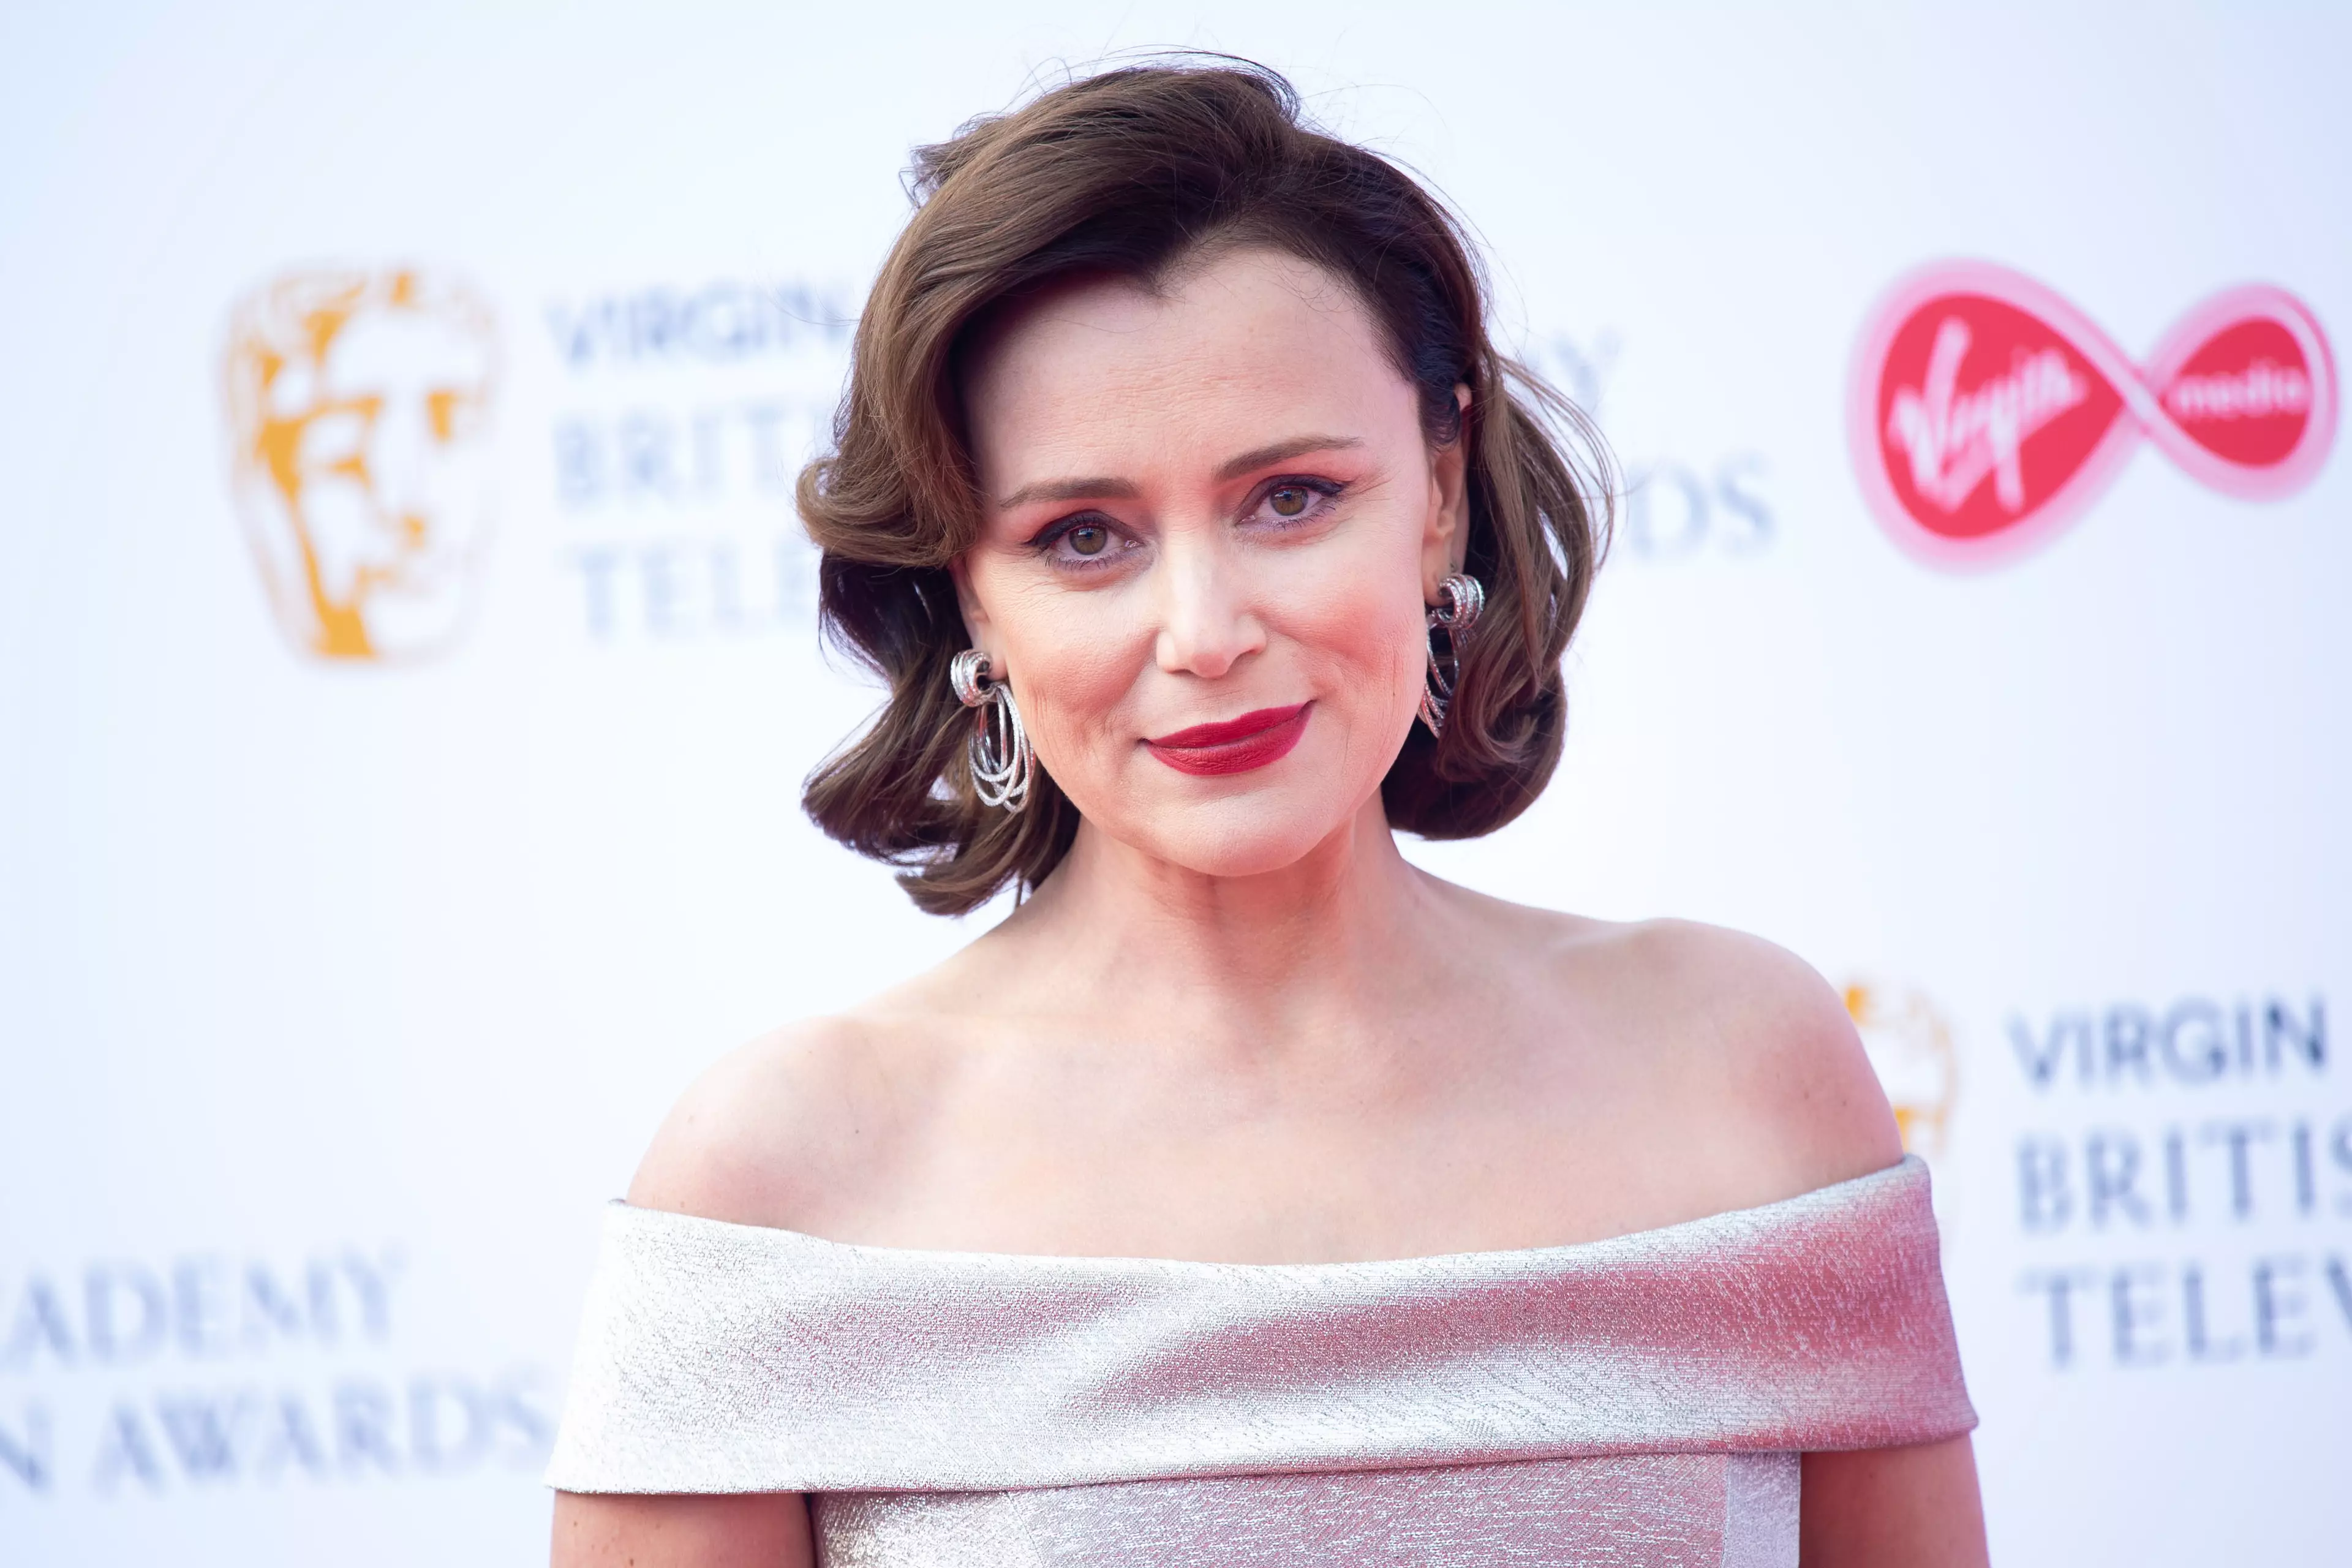 Keeley Hawes also serves as one of the show's executive producers (